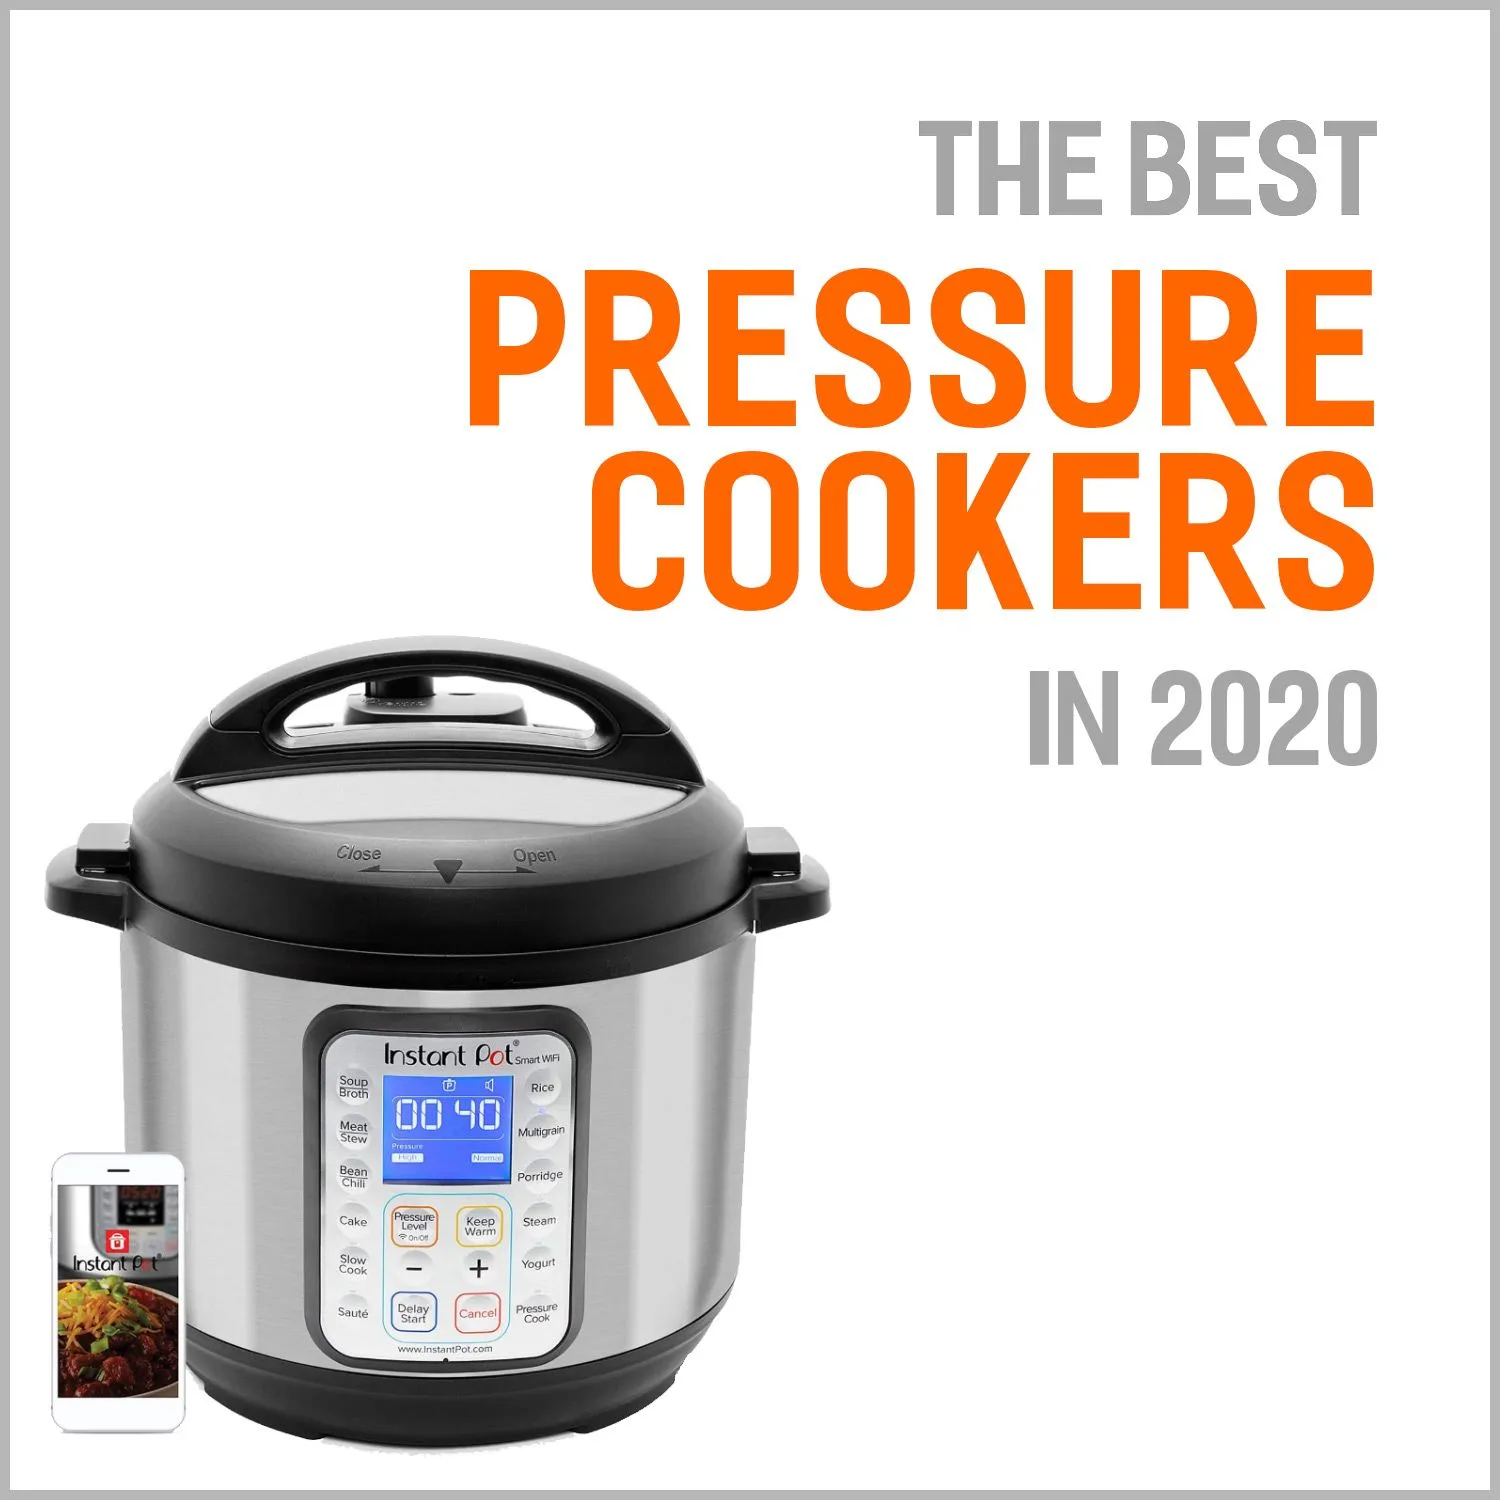 The 7 Best Pressure Cookers In 2020 Buyer S Guide Reviews,Sympathy Message